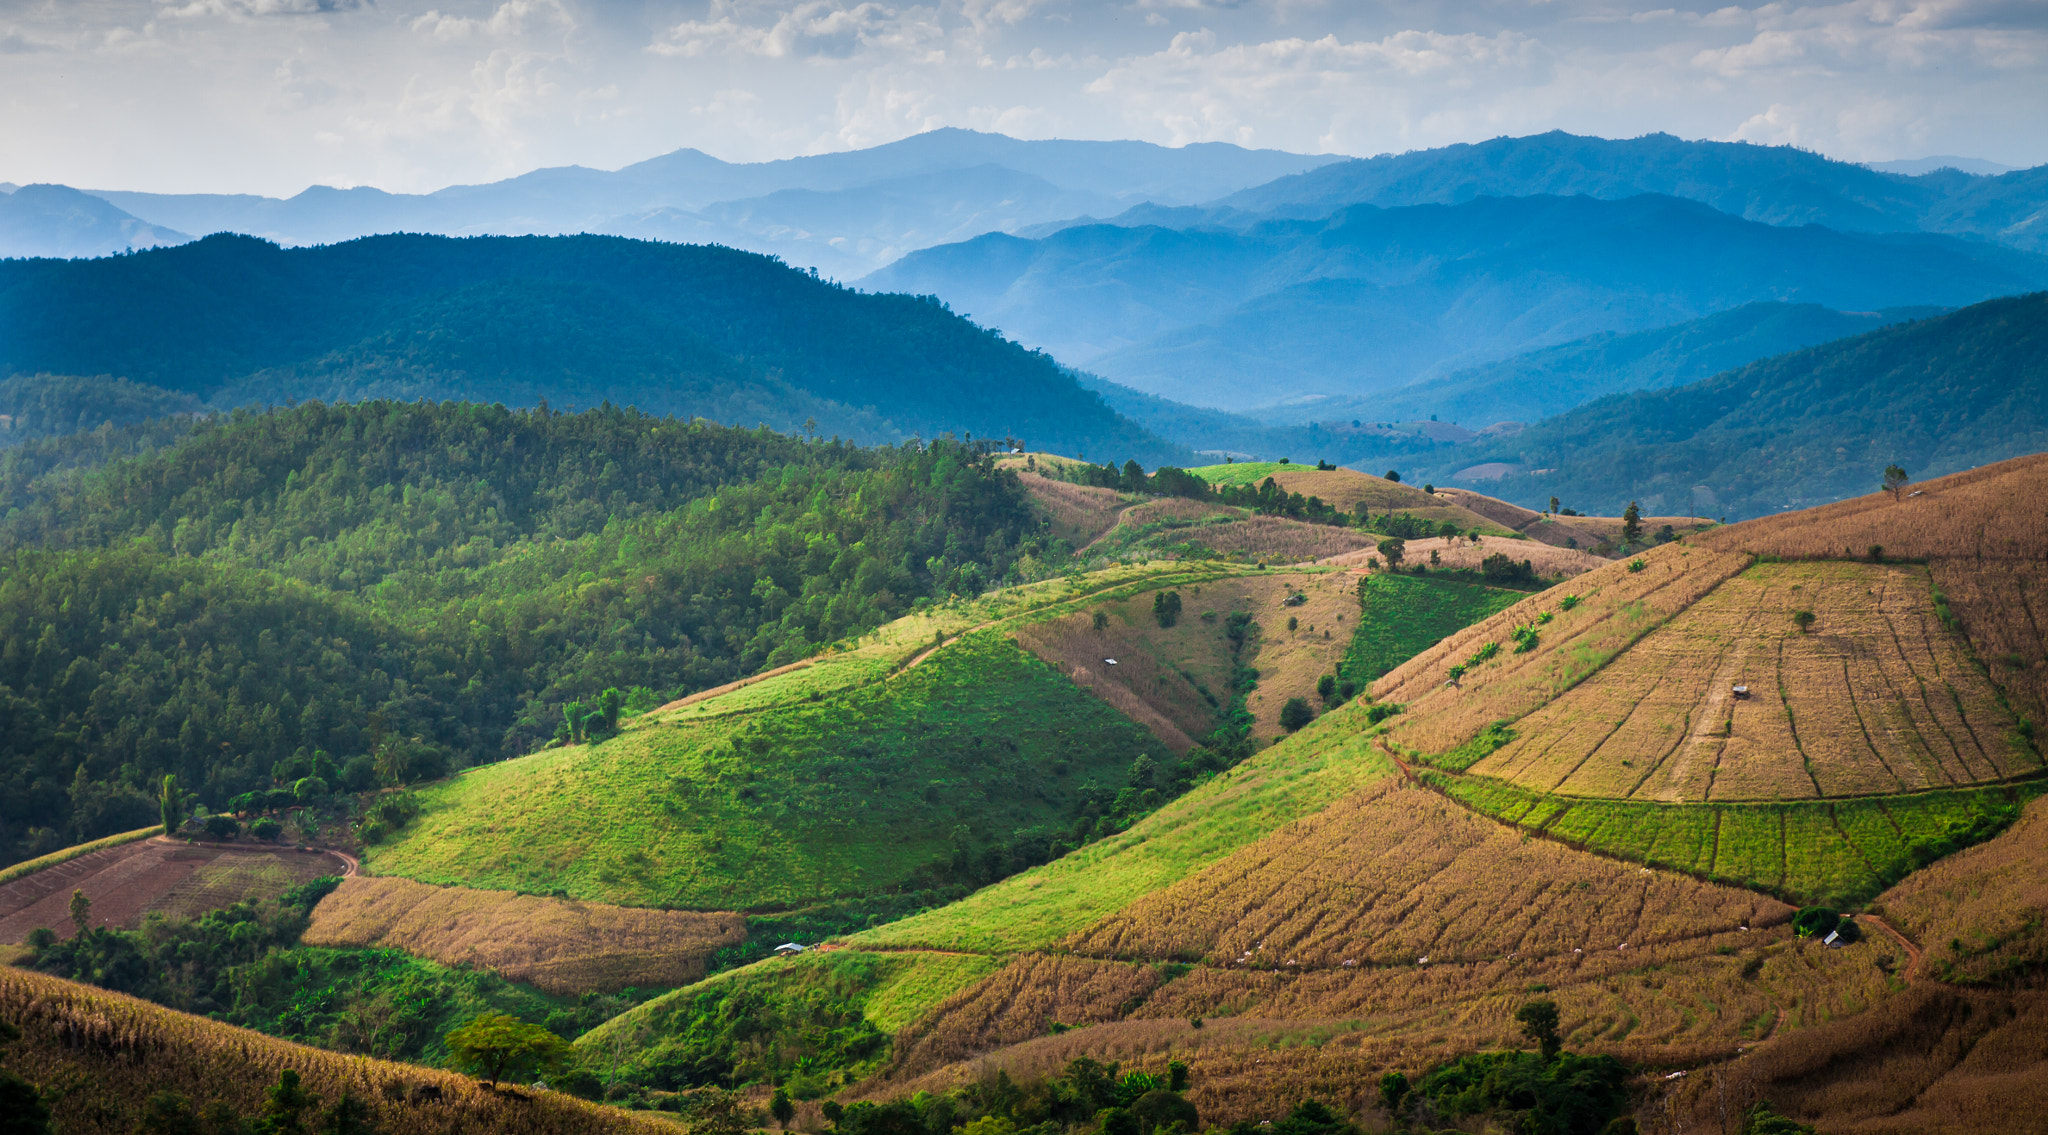 Rice terraces natural scenery in Thailand.